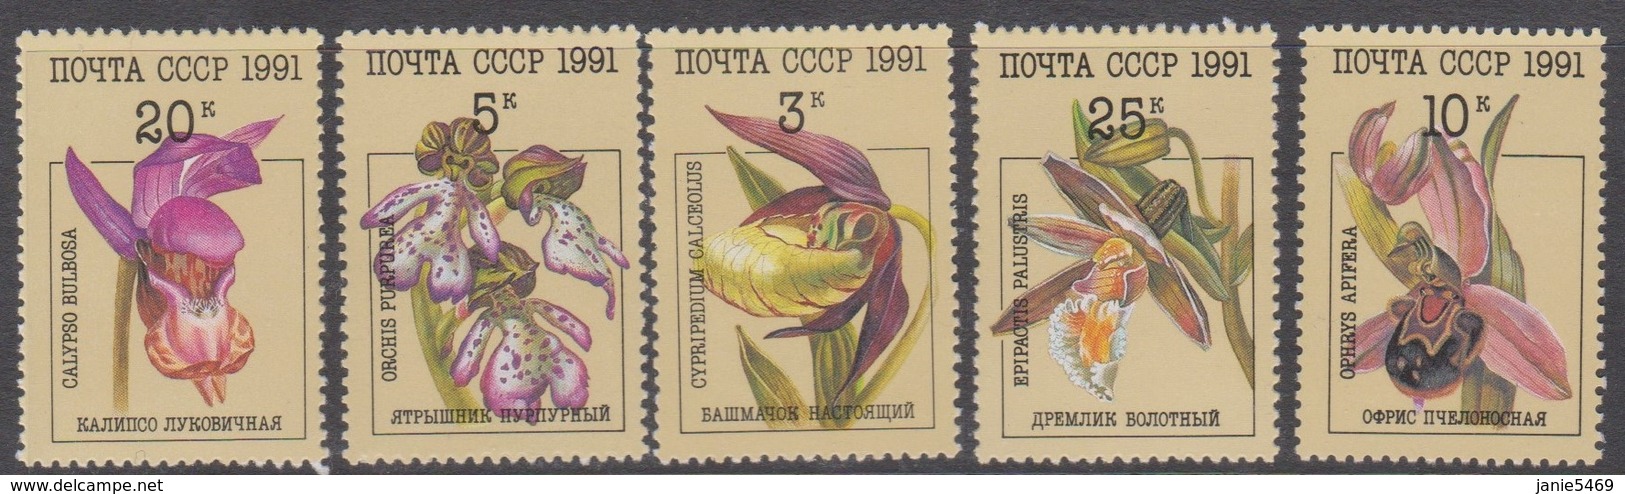 Russia 1991 Orchids, MNH - Orchids